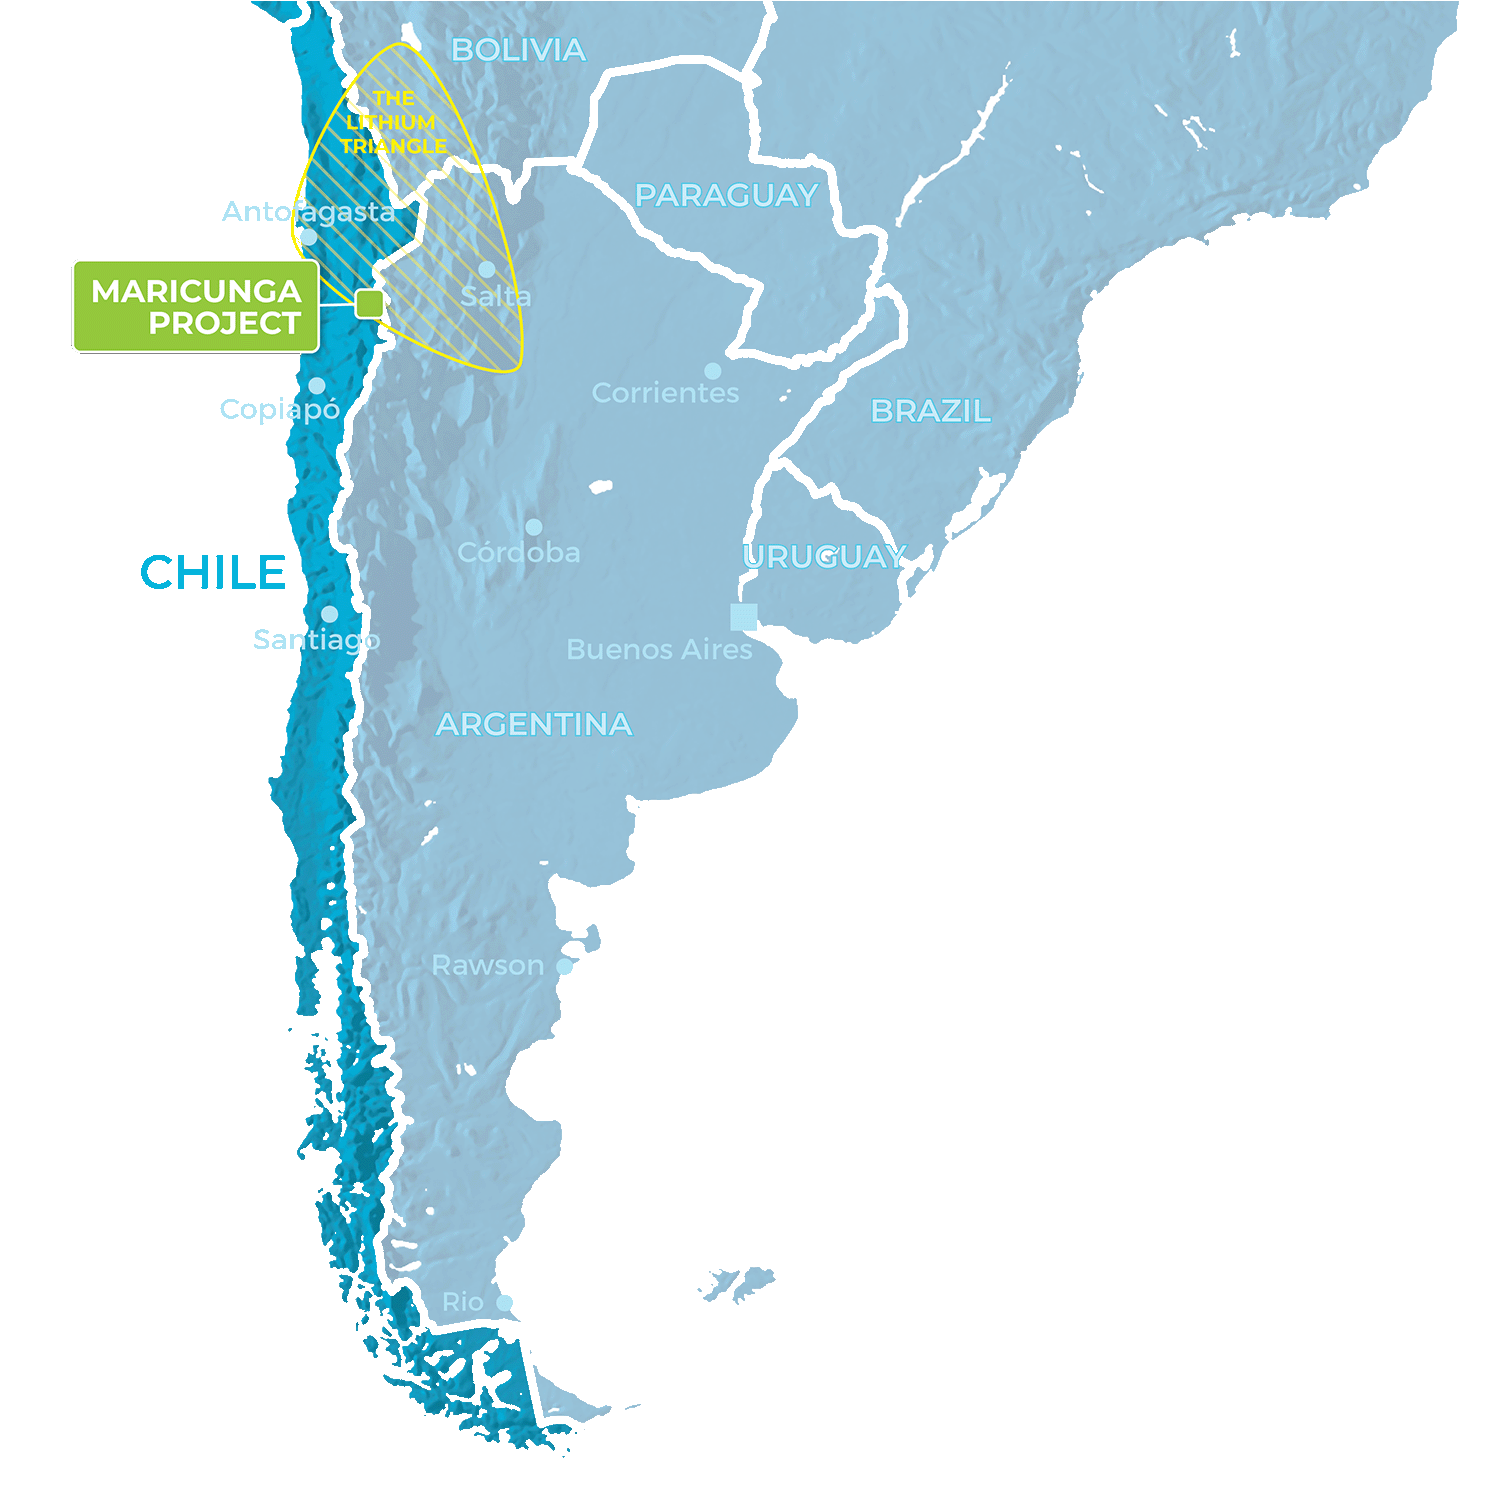 Map of South America, with Chile highlighted. A yellow triangle outlines the northern end of Chile, part of Bolivia and part of Argentina. The yellow triangle is labelled 'The Lithium Triangle'. The Maricunga Project is marked a little way inside the middle southern edge of the lithium triangle.